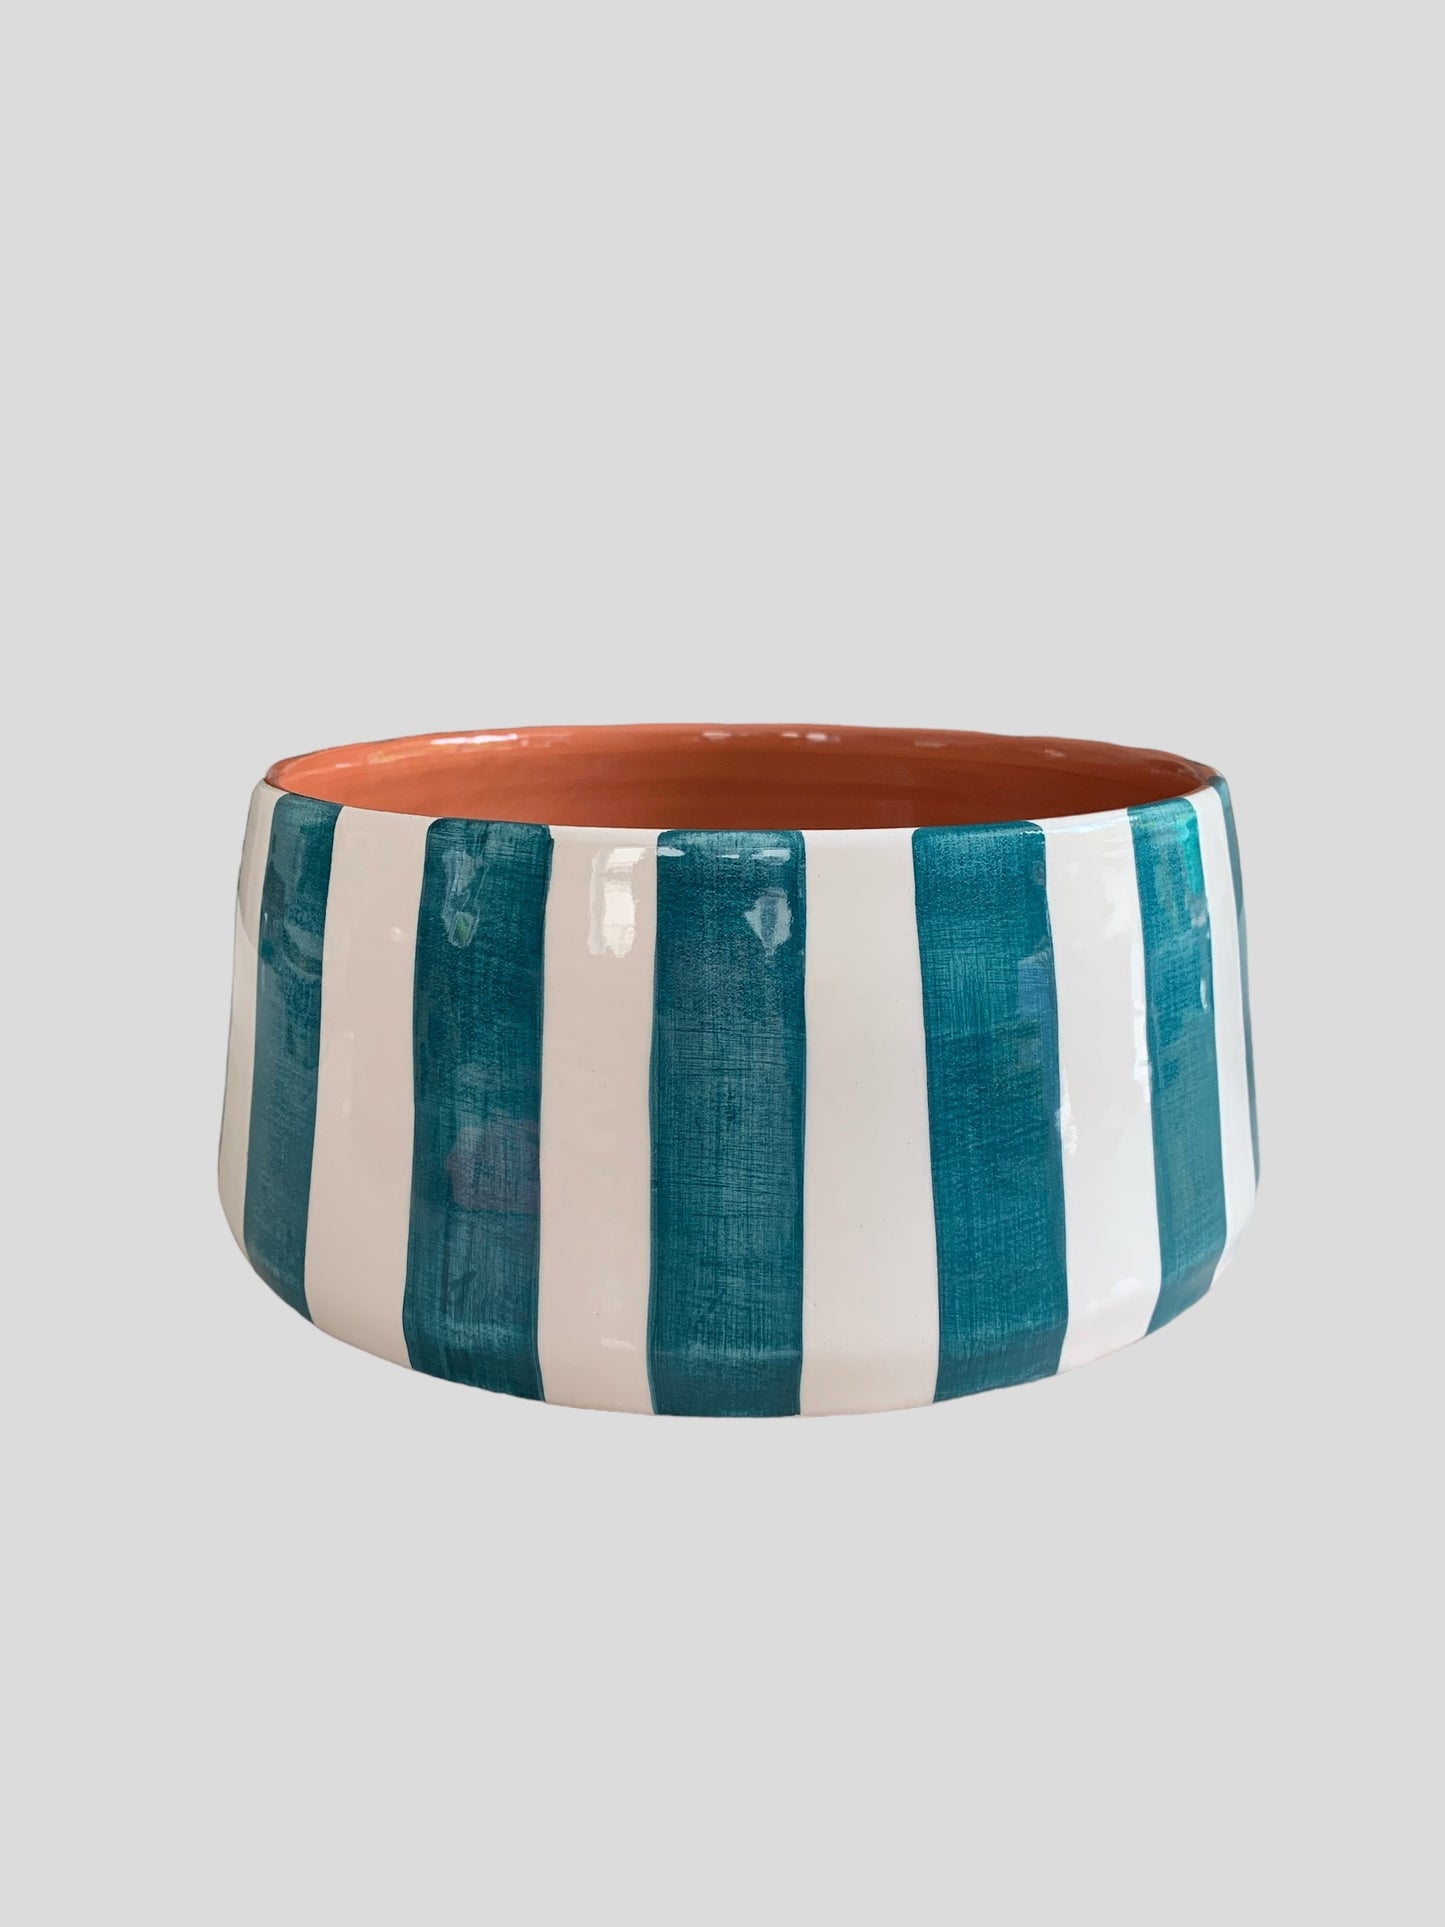 A ceramic tapered salad bowl hand-painted with bold, teal stripes from casa cubista in Portugal.